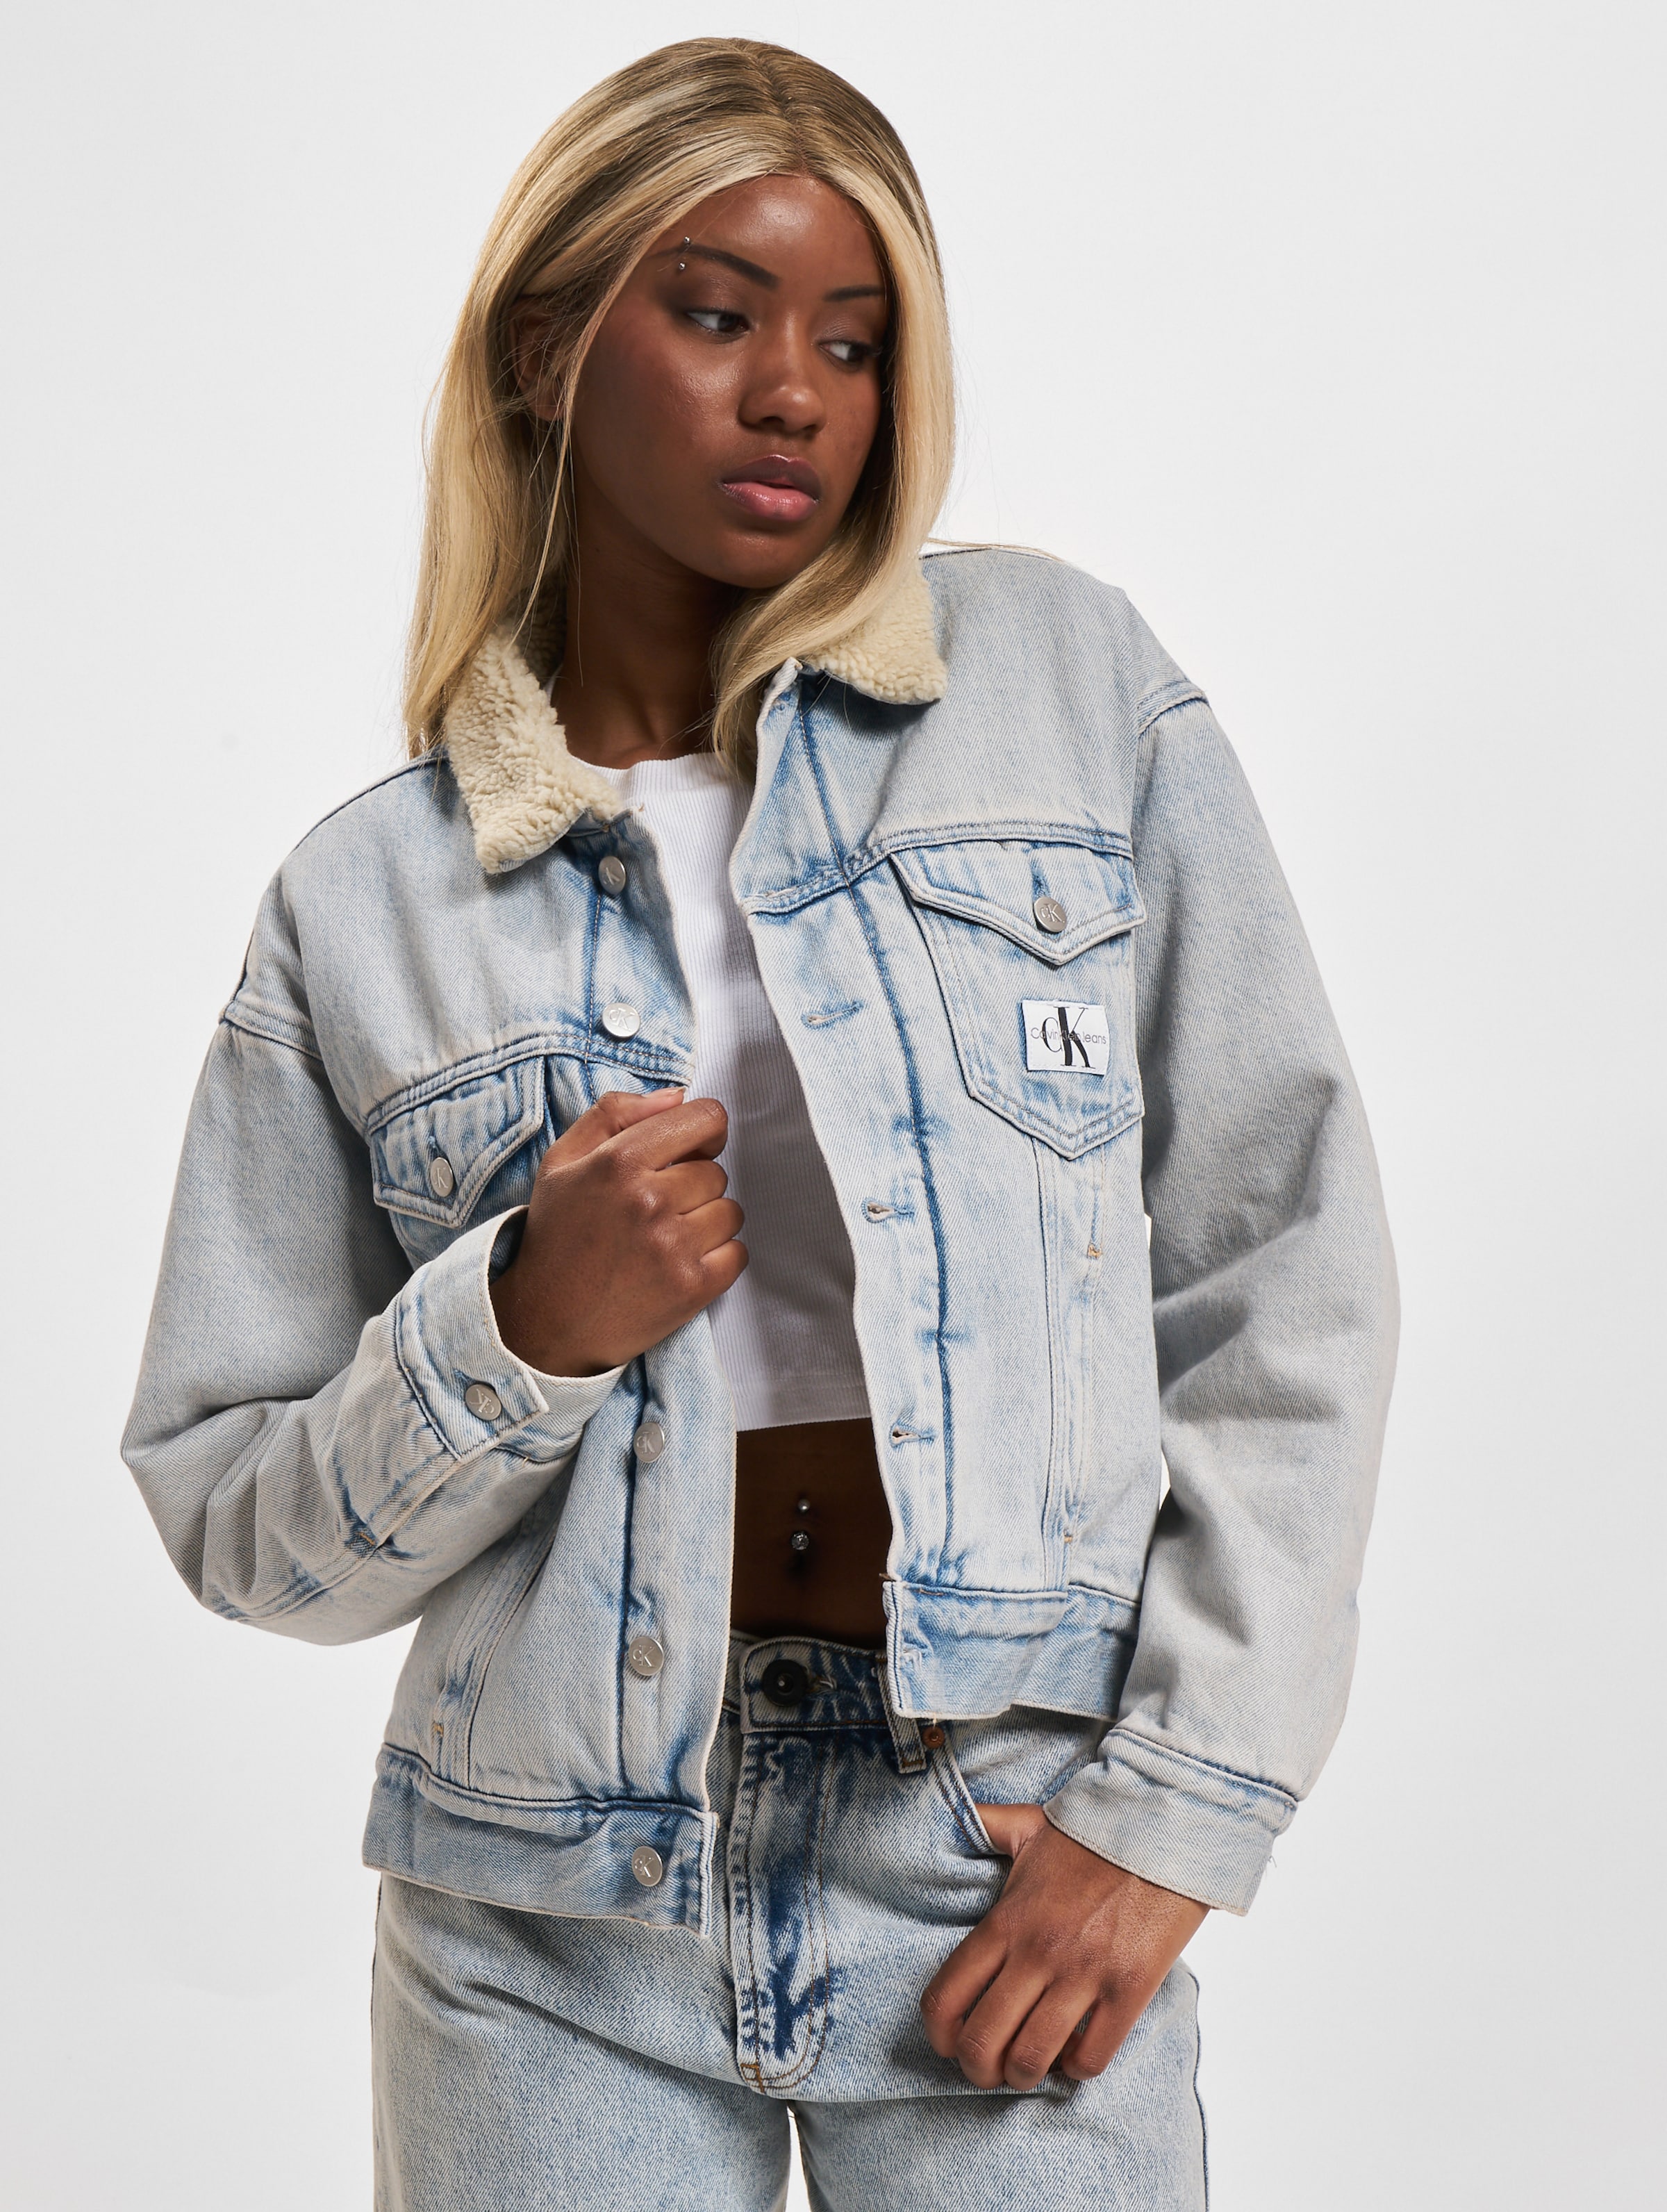 Say What You Mean Women's Sherpa Denim Jacket - Best Gifts - Gifts for Women  - Light Washed, S at Amazon Women's Coats Shop